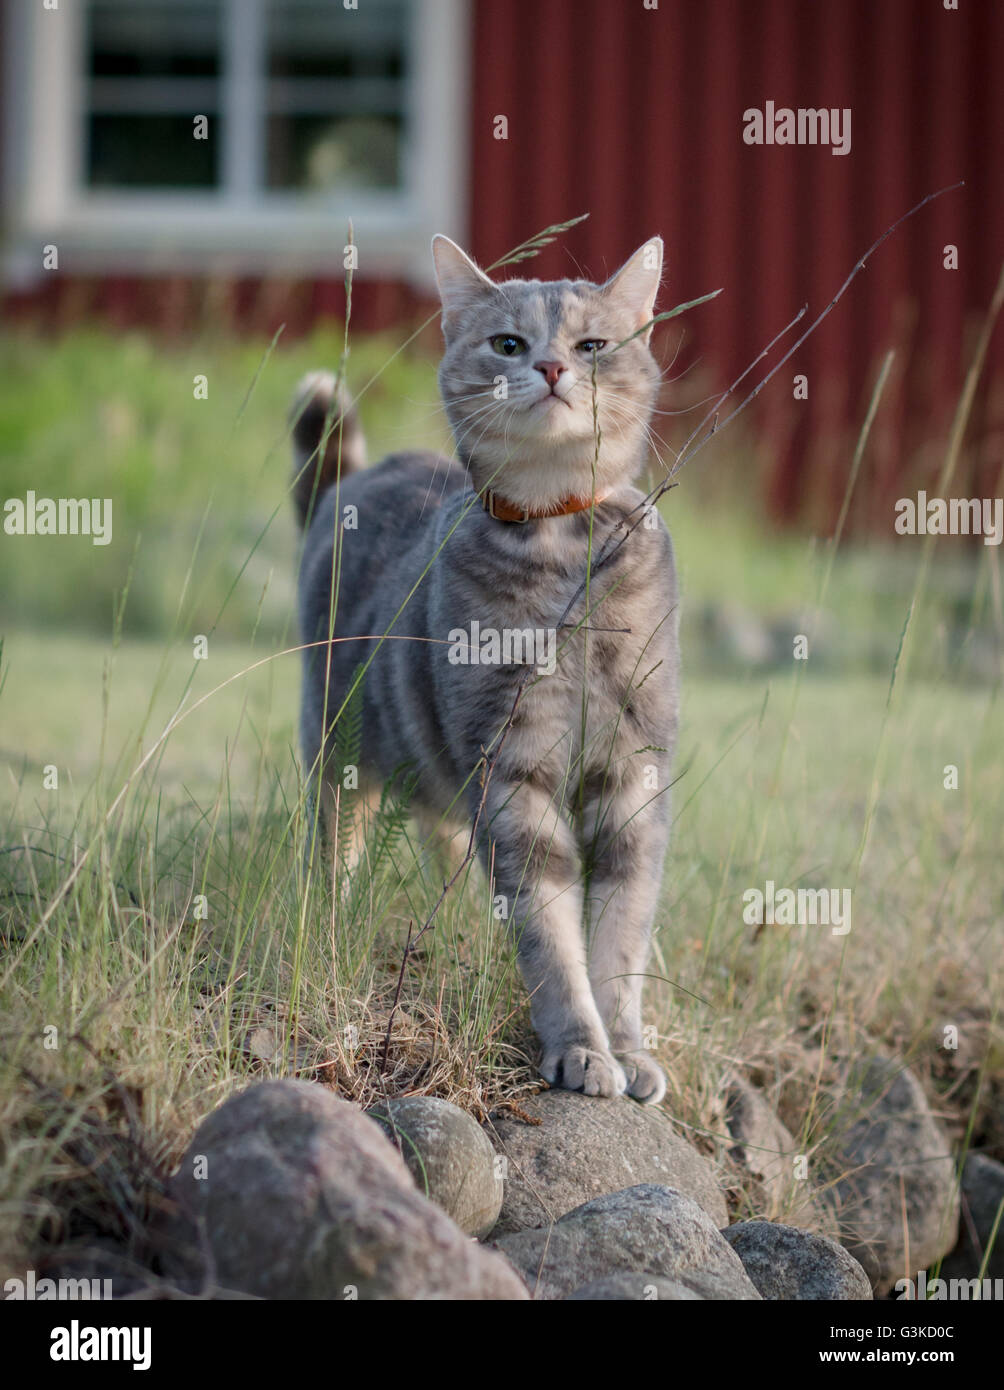 Grey tabby cat looking at insects on a grass straw Stock Photo